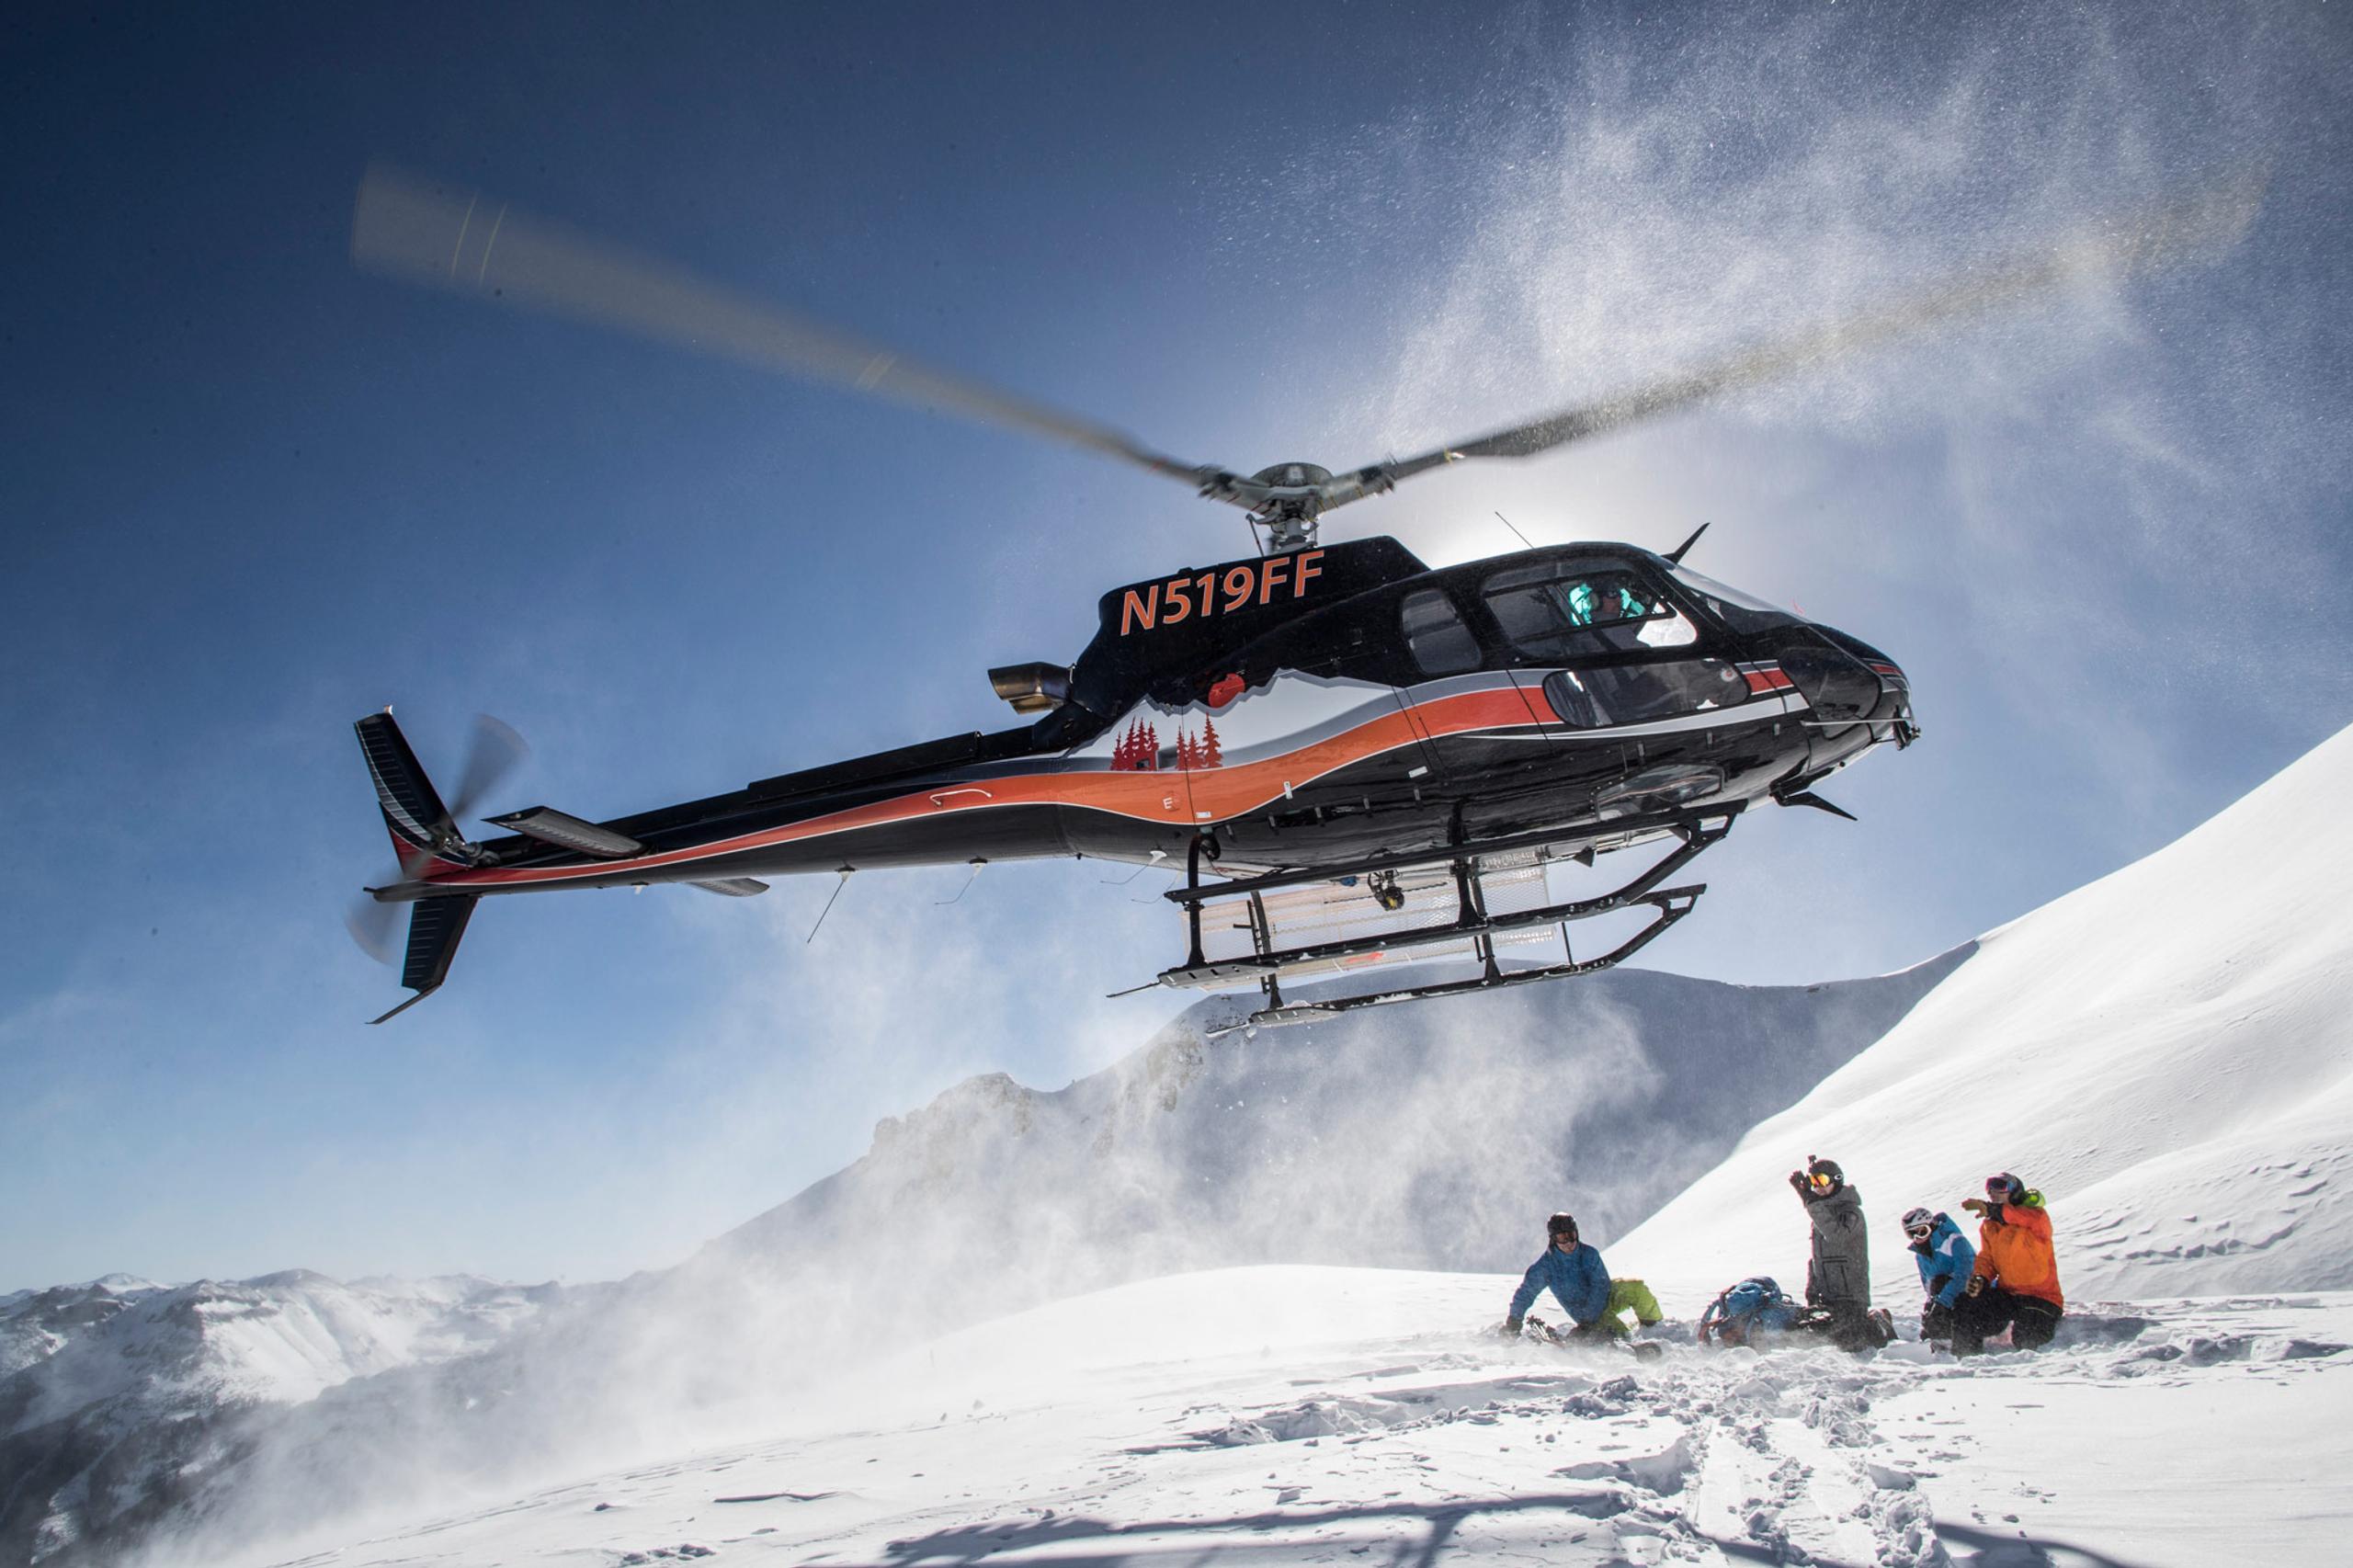 Helicopter dropping off skiers on mountain